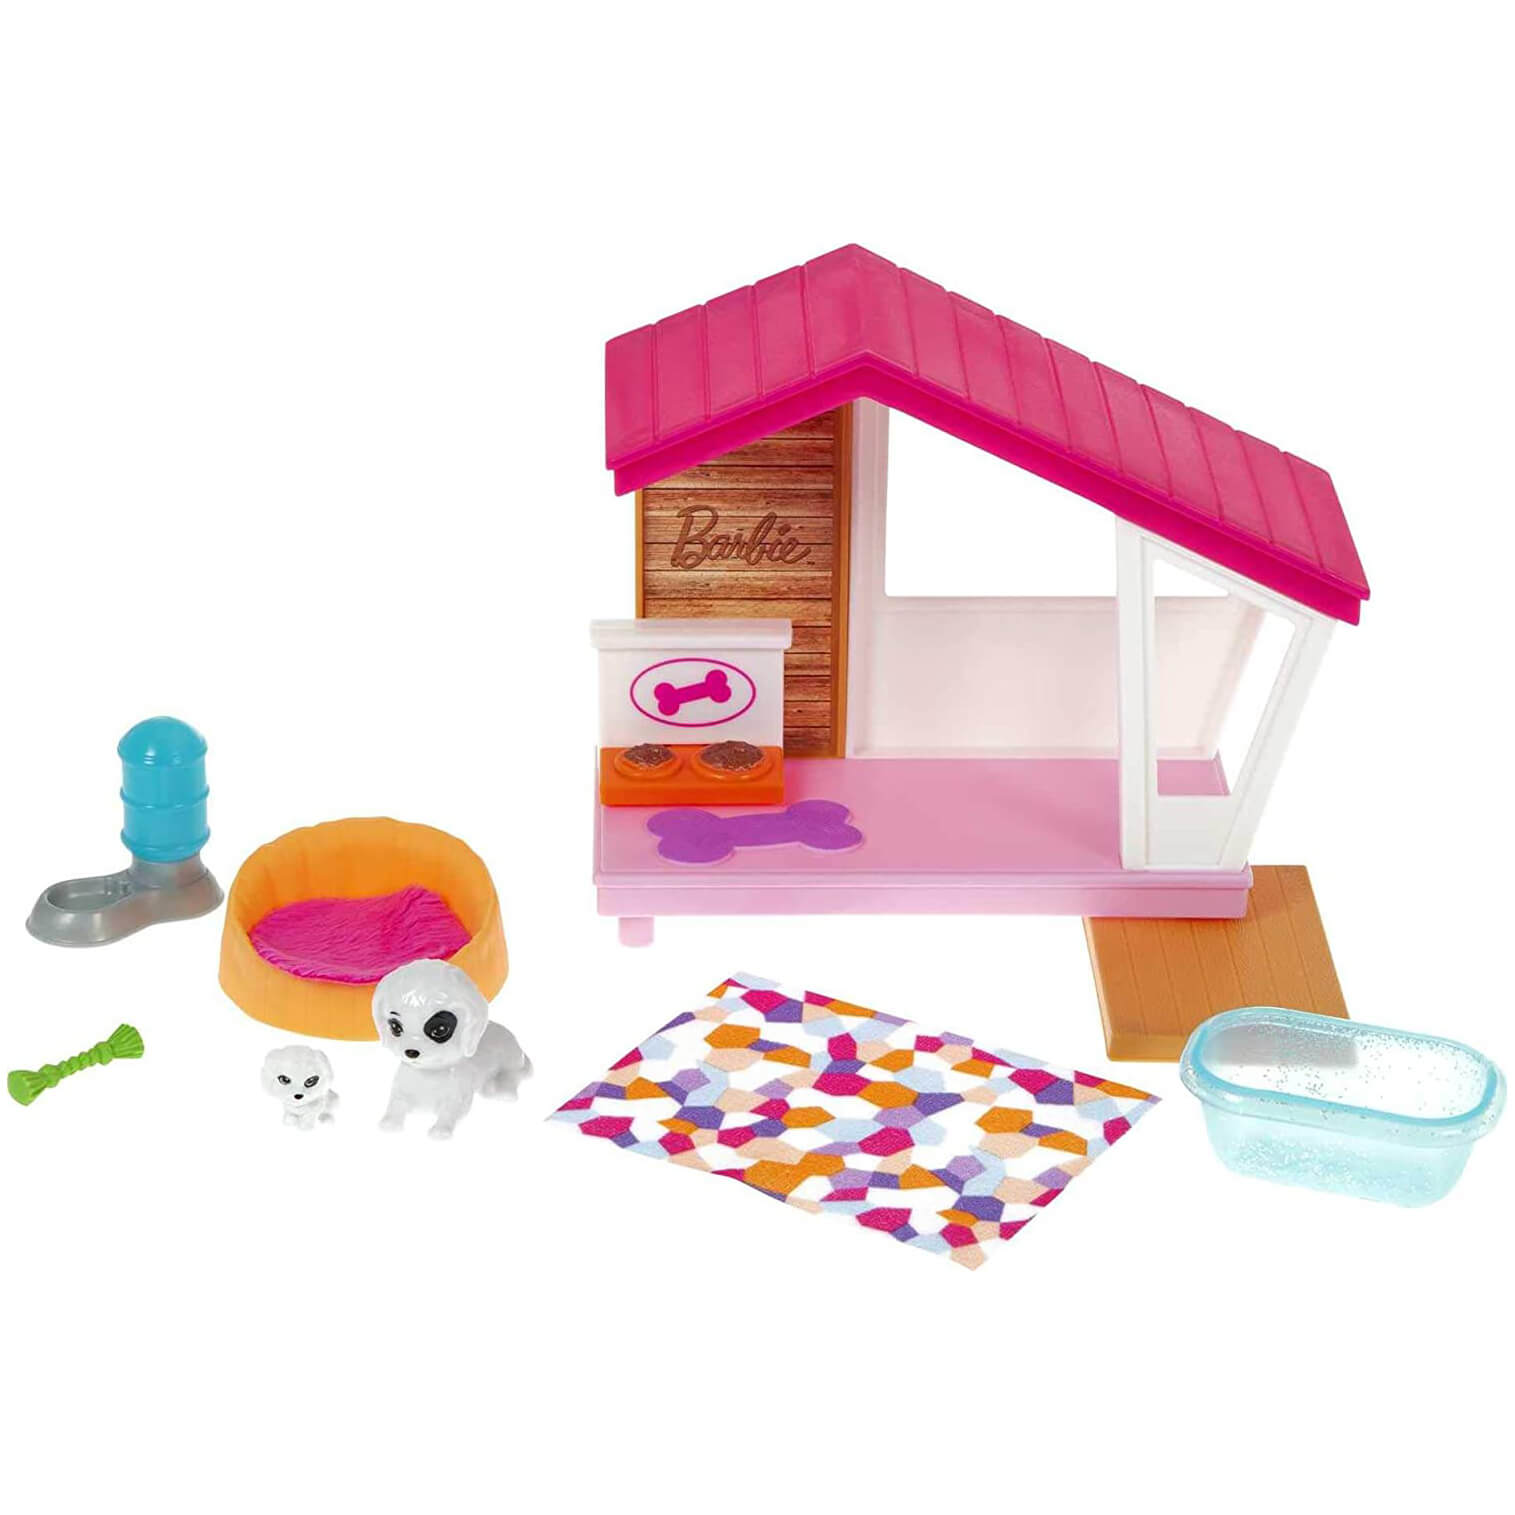 Barbie Doll and Mini Doghouse Accessory Playset